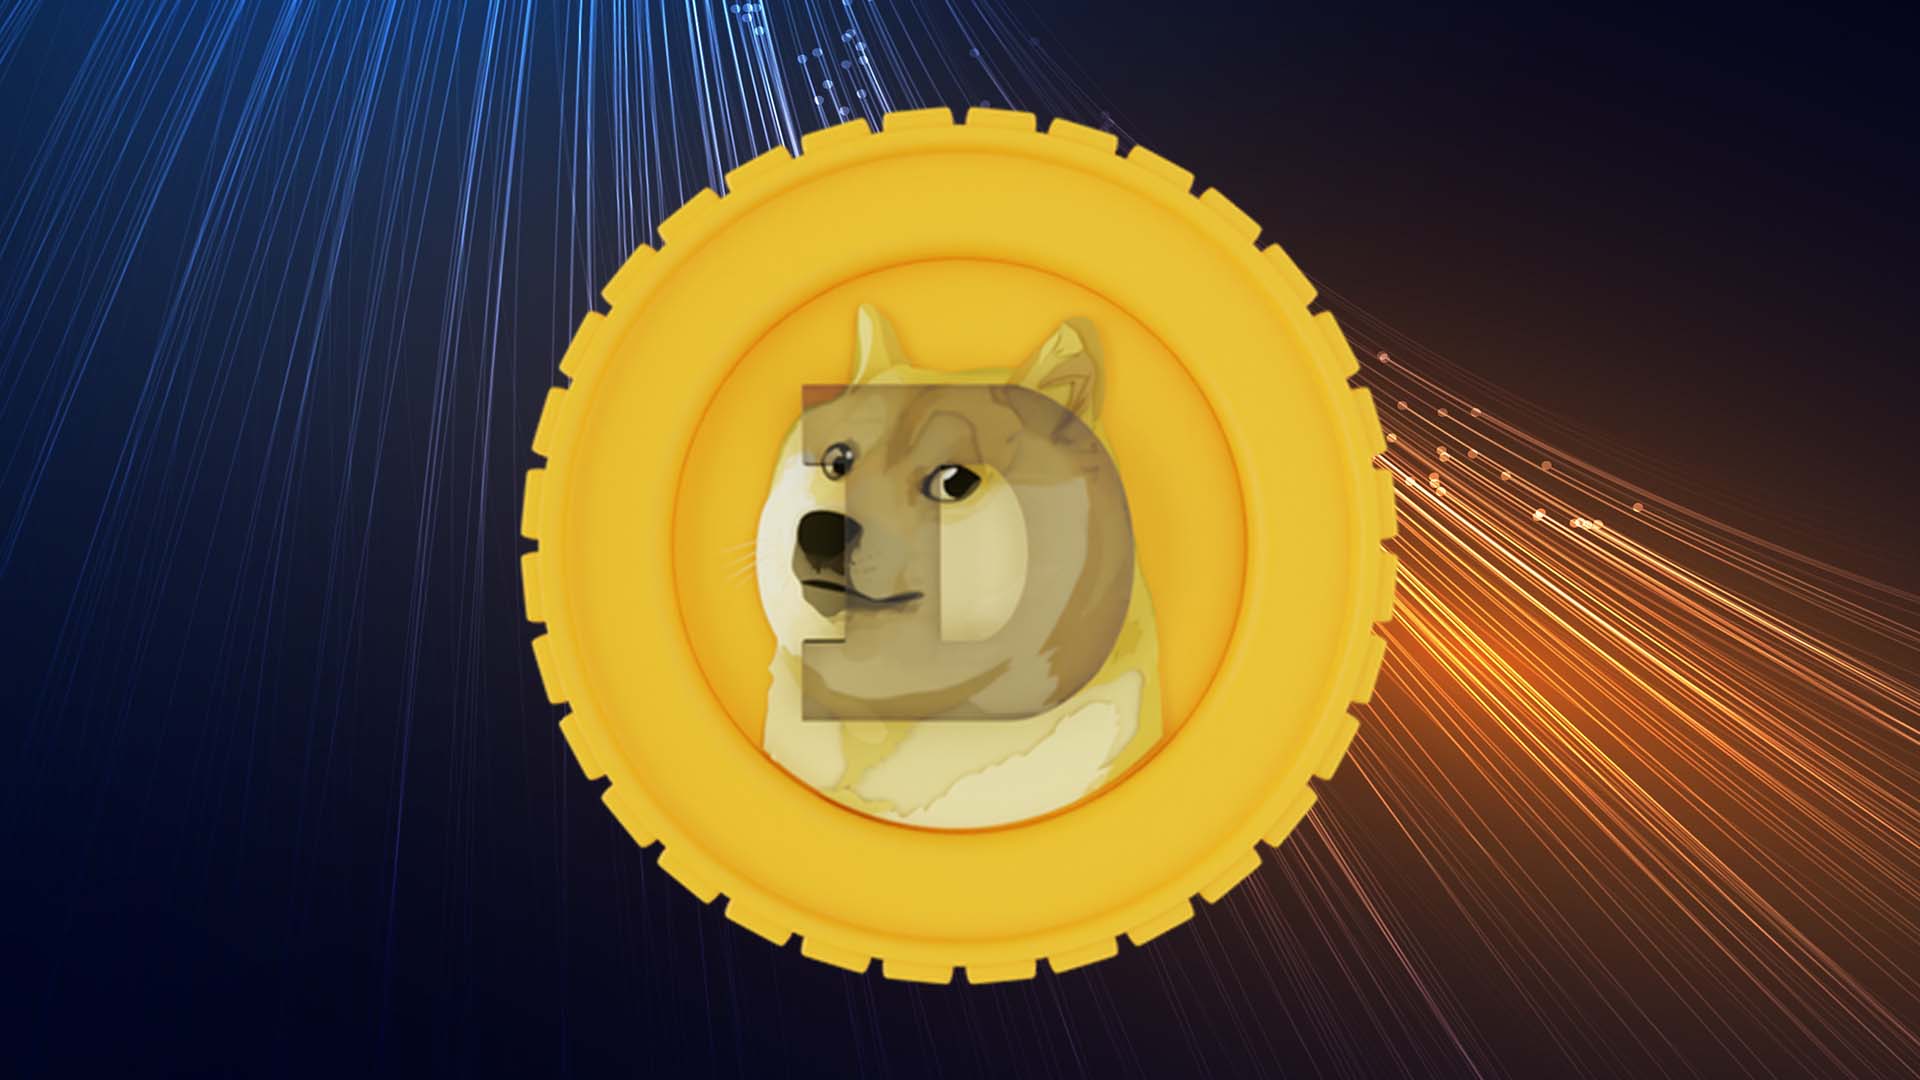 Dogecoin Price Prediction: DOGE Cryptocurrency Marching Towards the Lower Price Range, What’s Next?